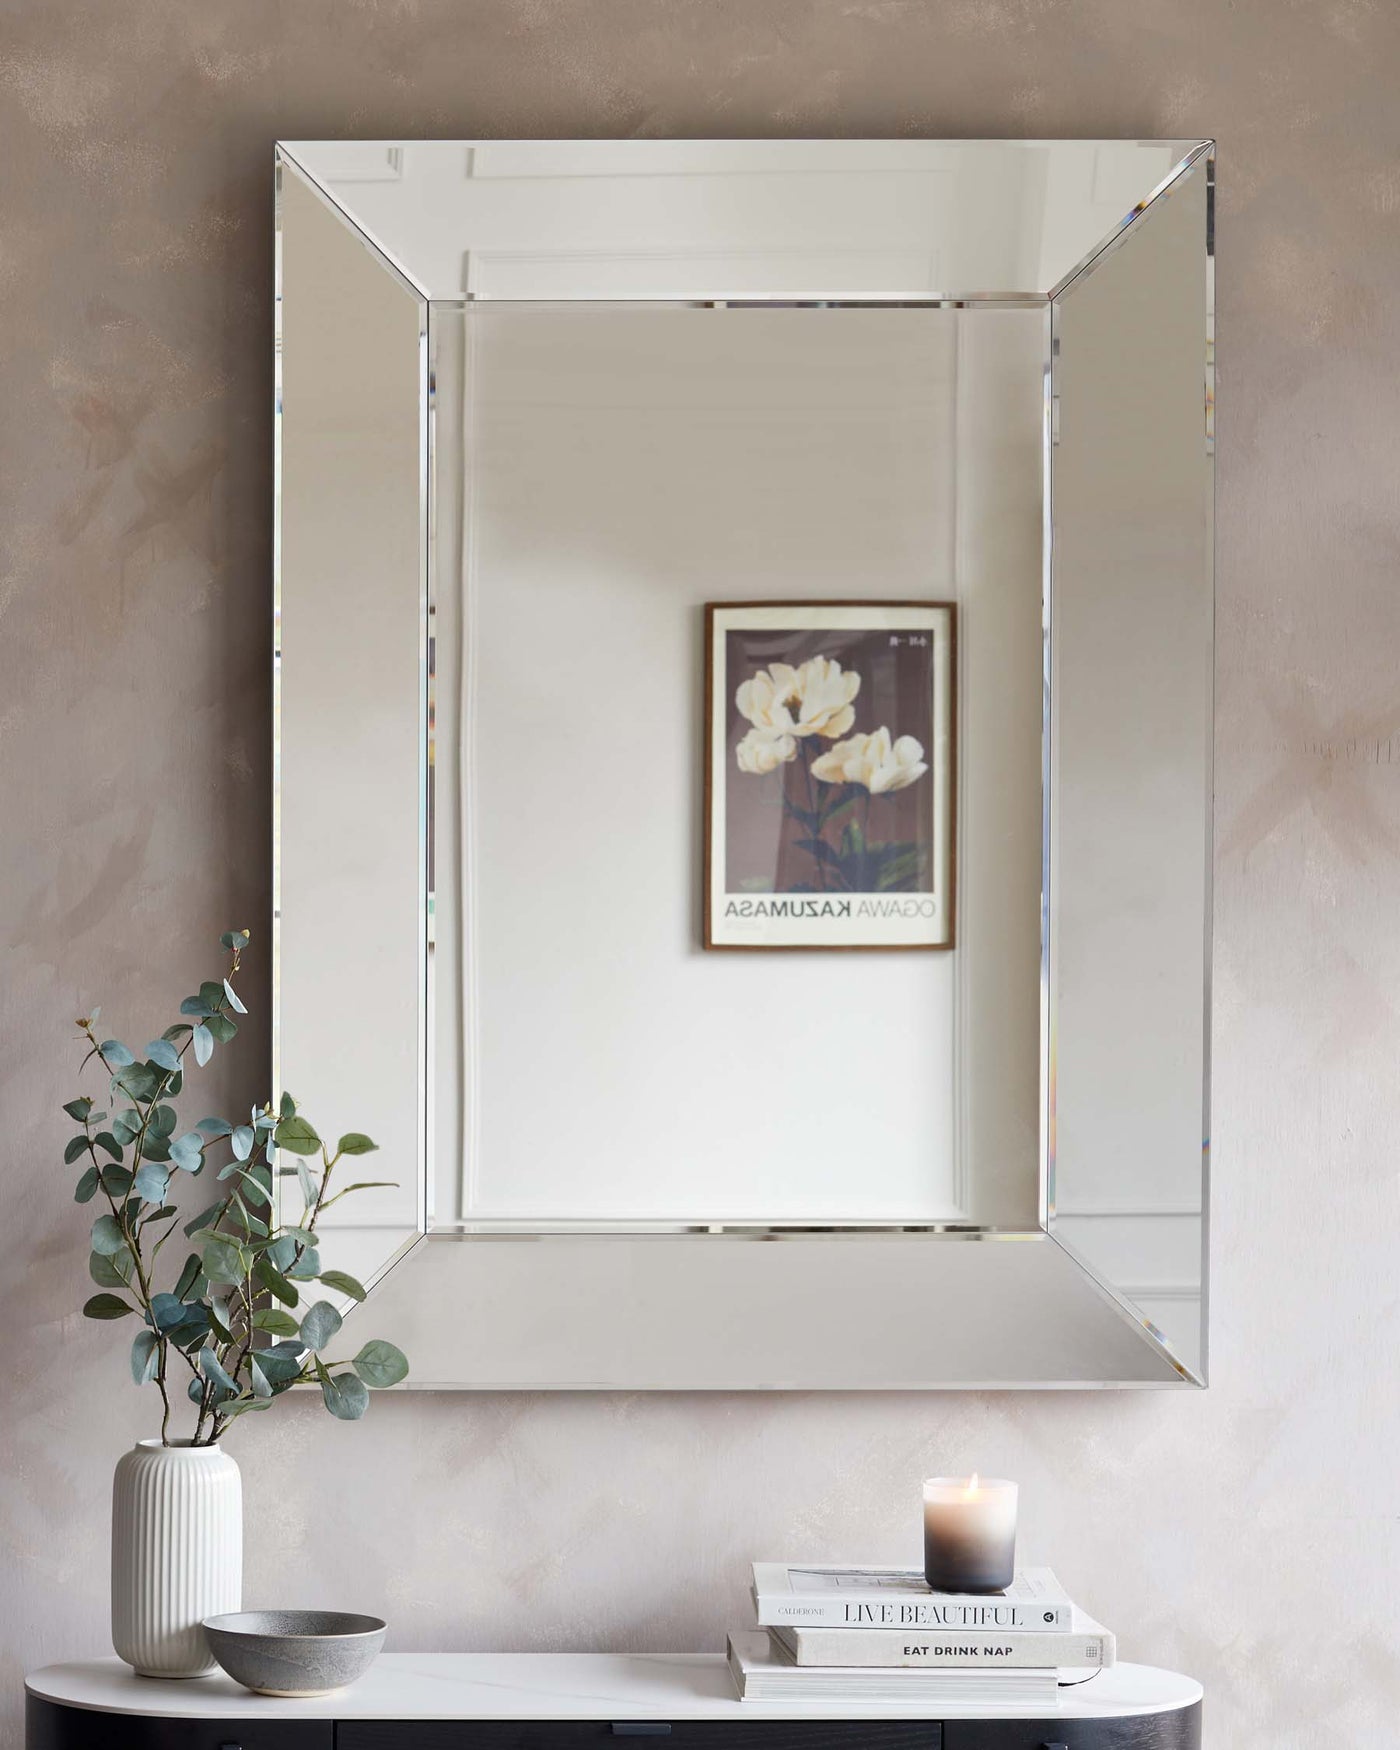 Elegant rectangular bevelled mirror with a reflective frame, mounted above a modern minimalist black console table featuring books, a candle, a ceramic bowl, and a white vase with eucalyptus branches.